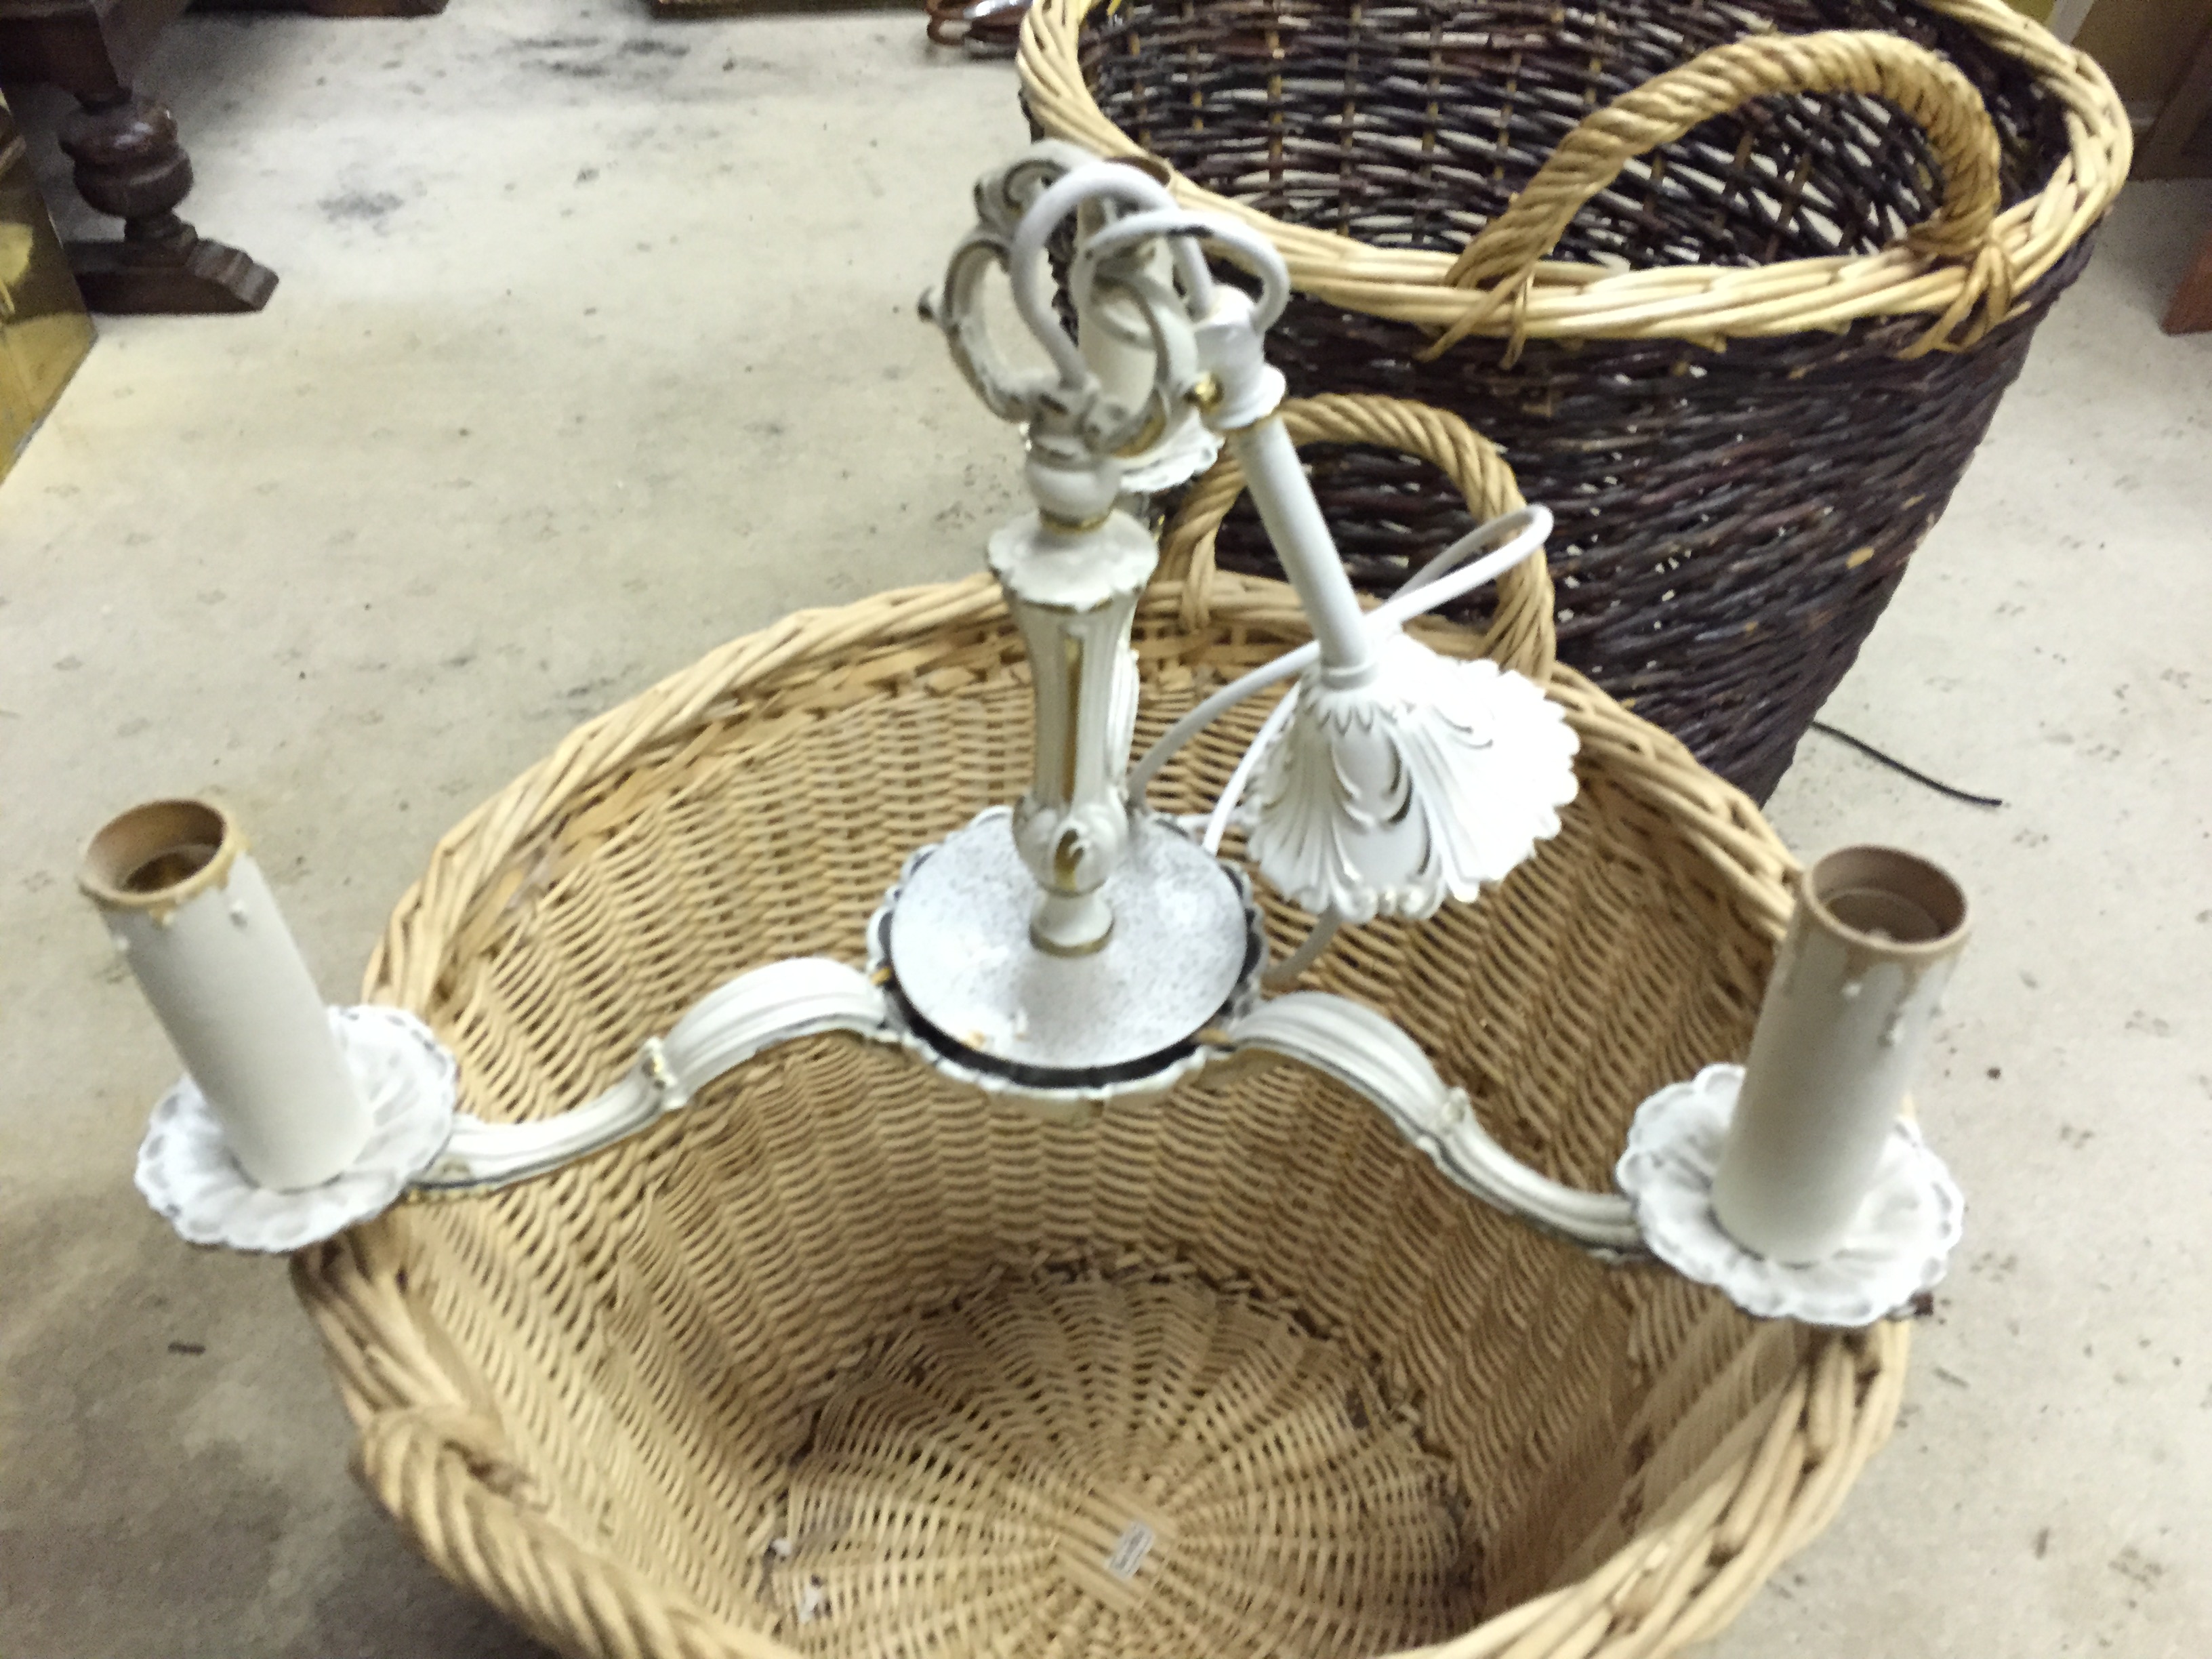 Two wicker baskets and a light fitting. - Image 2 of 3